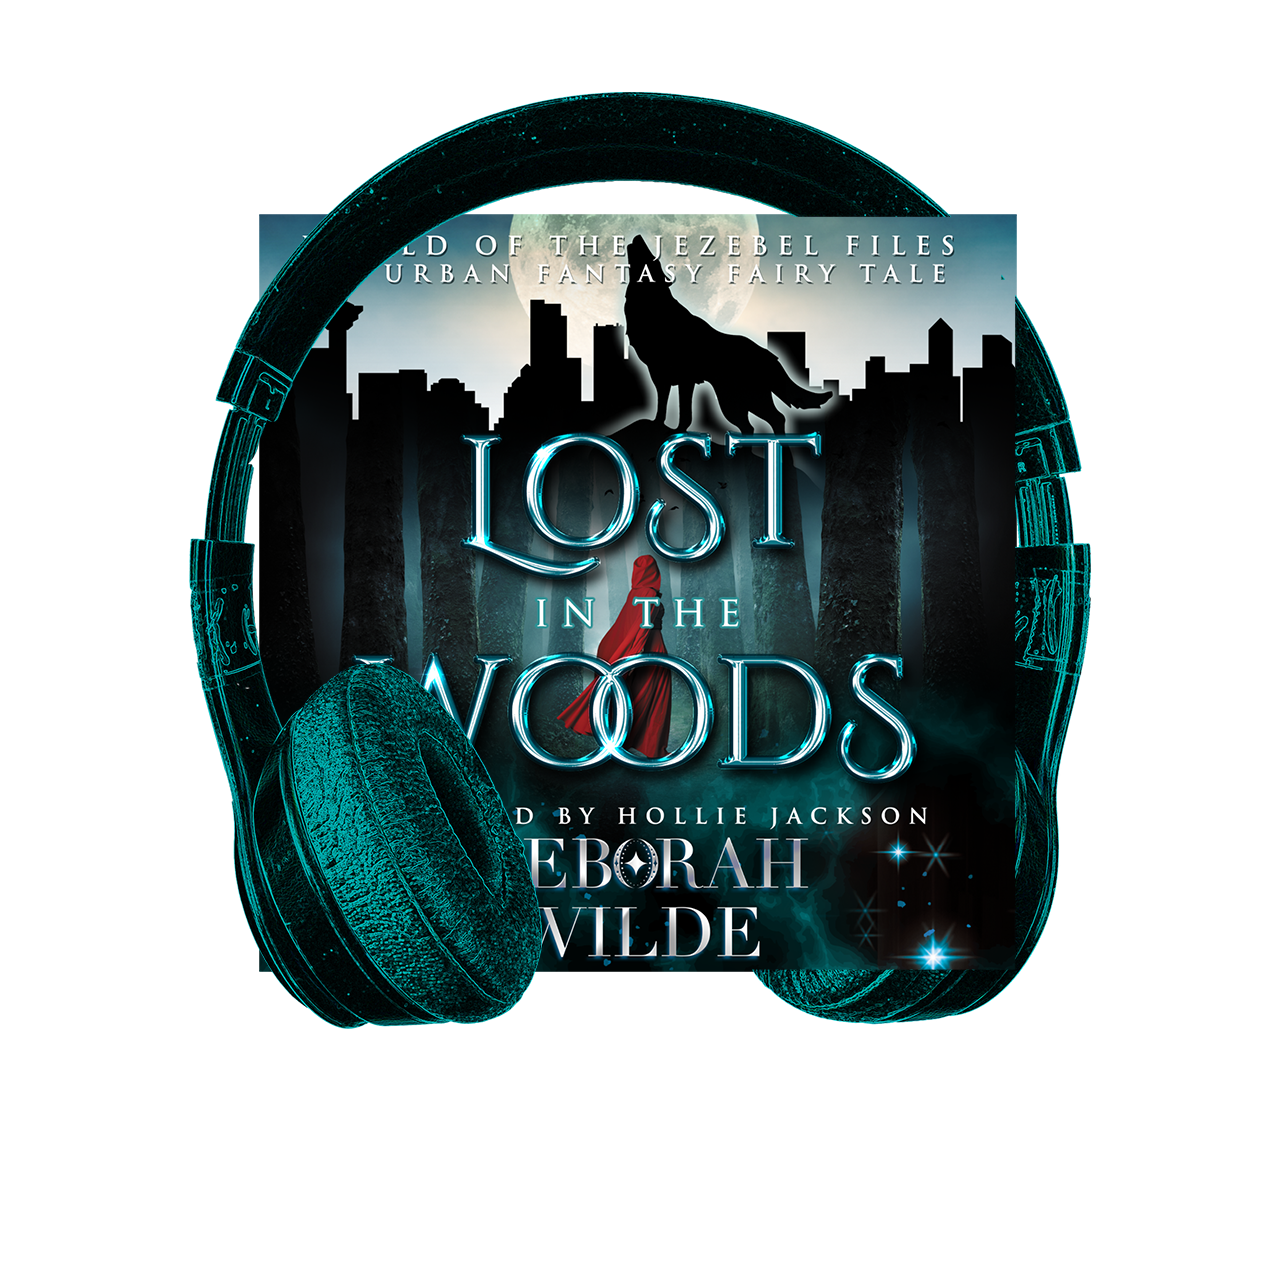 Lost in the Woods audiobook by Deborah Wilde. Read by Hollie Jackson. The World of the Jezebel Files.